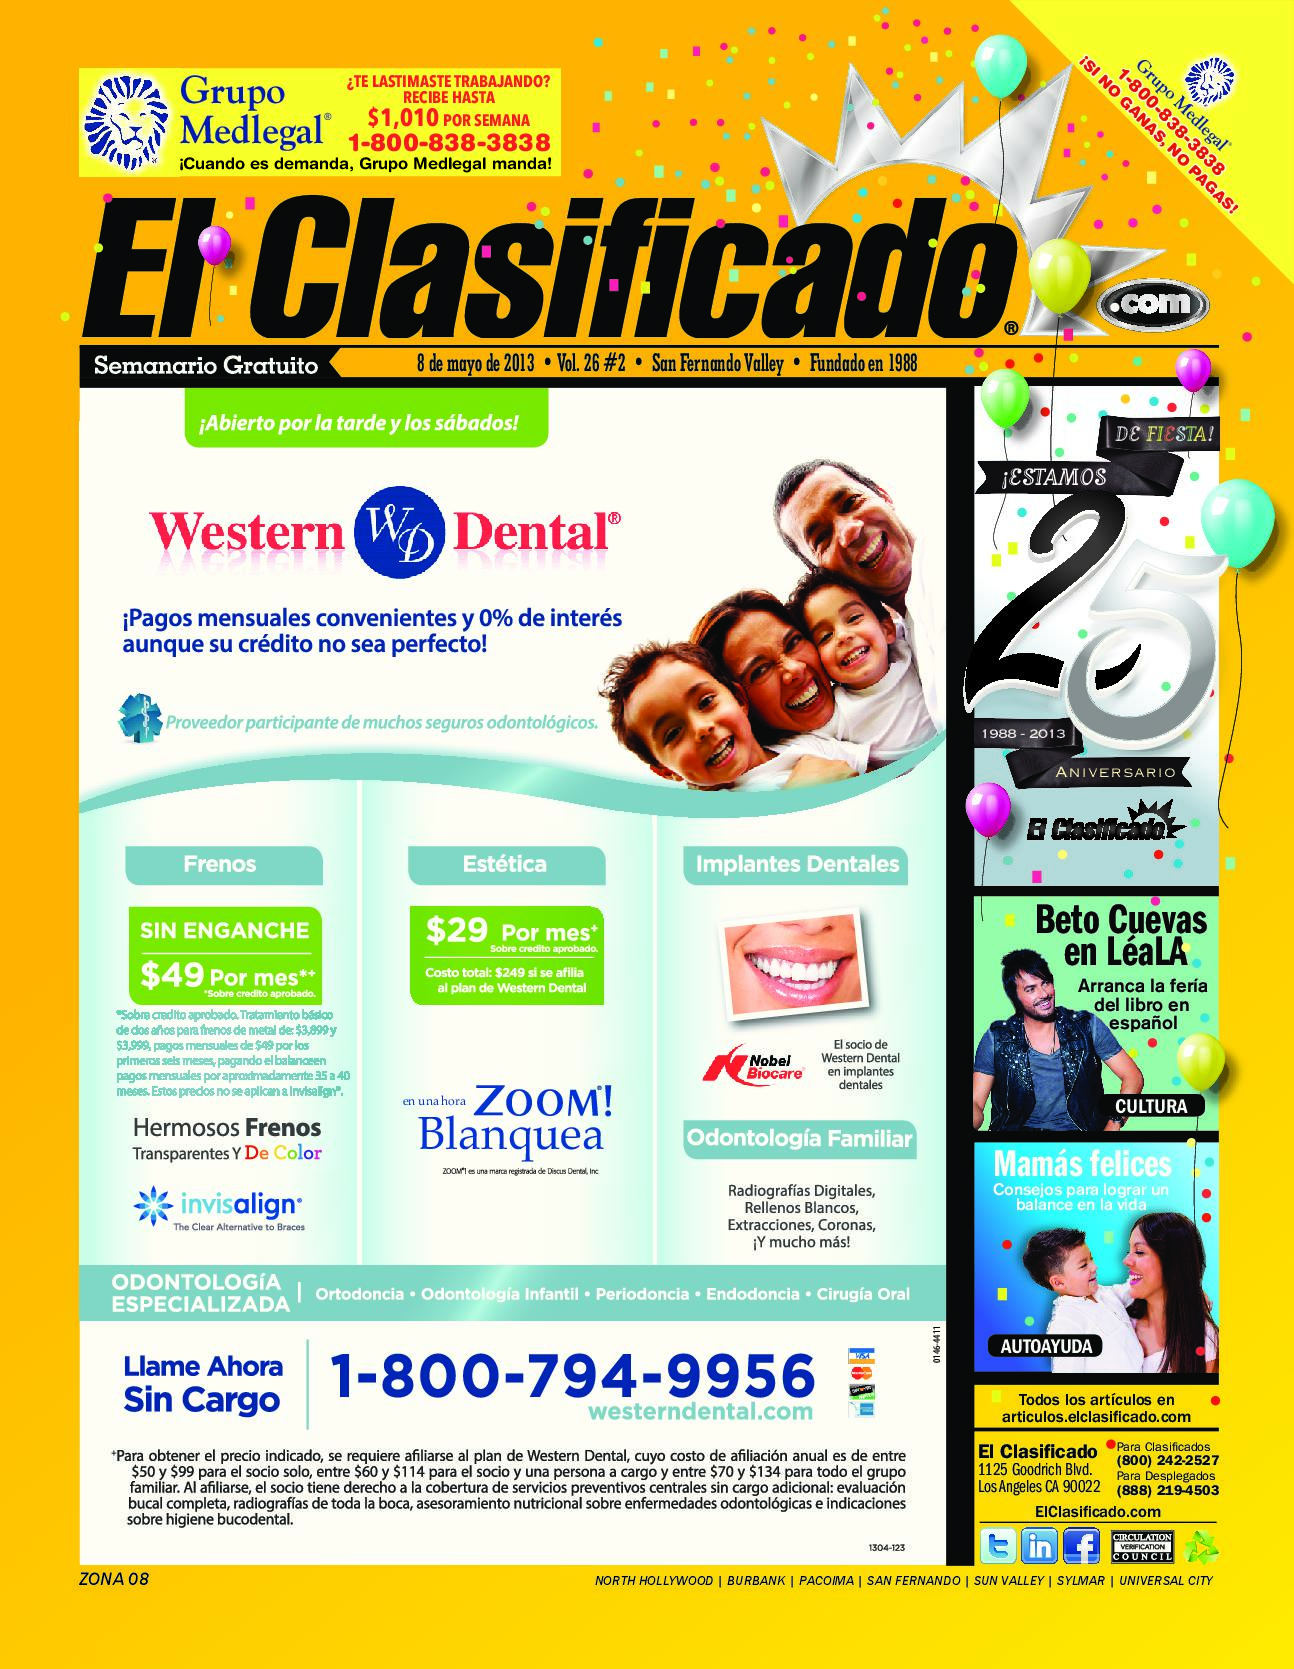 El Clasificado Named Finalist for Ernst & Young Entrepreneur of the Year